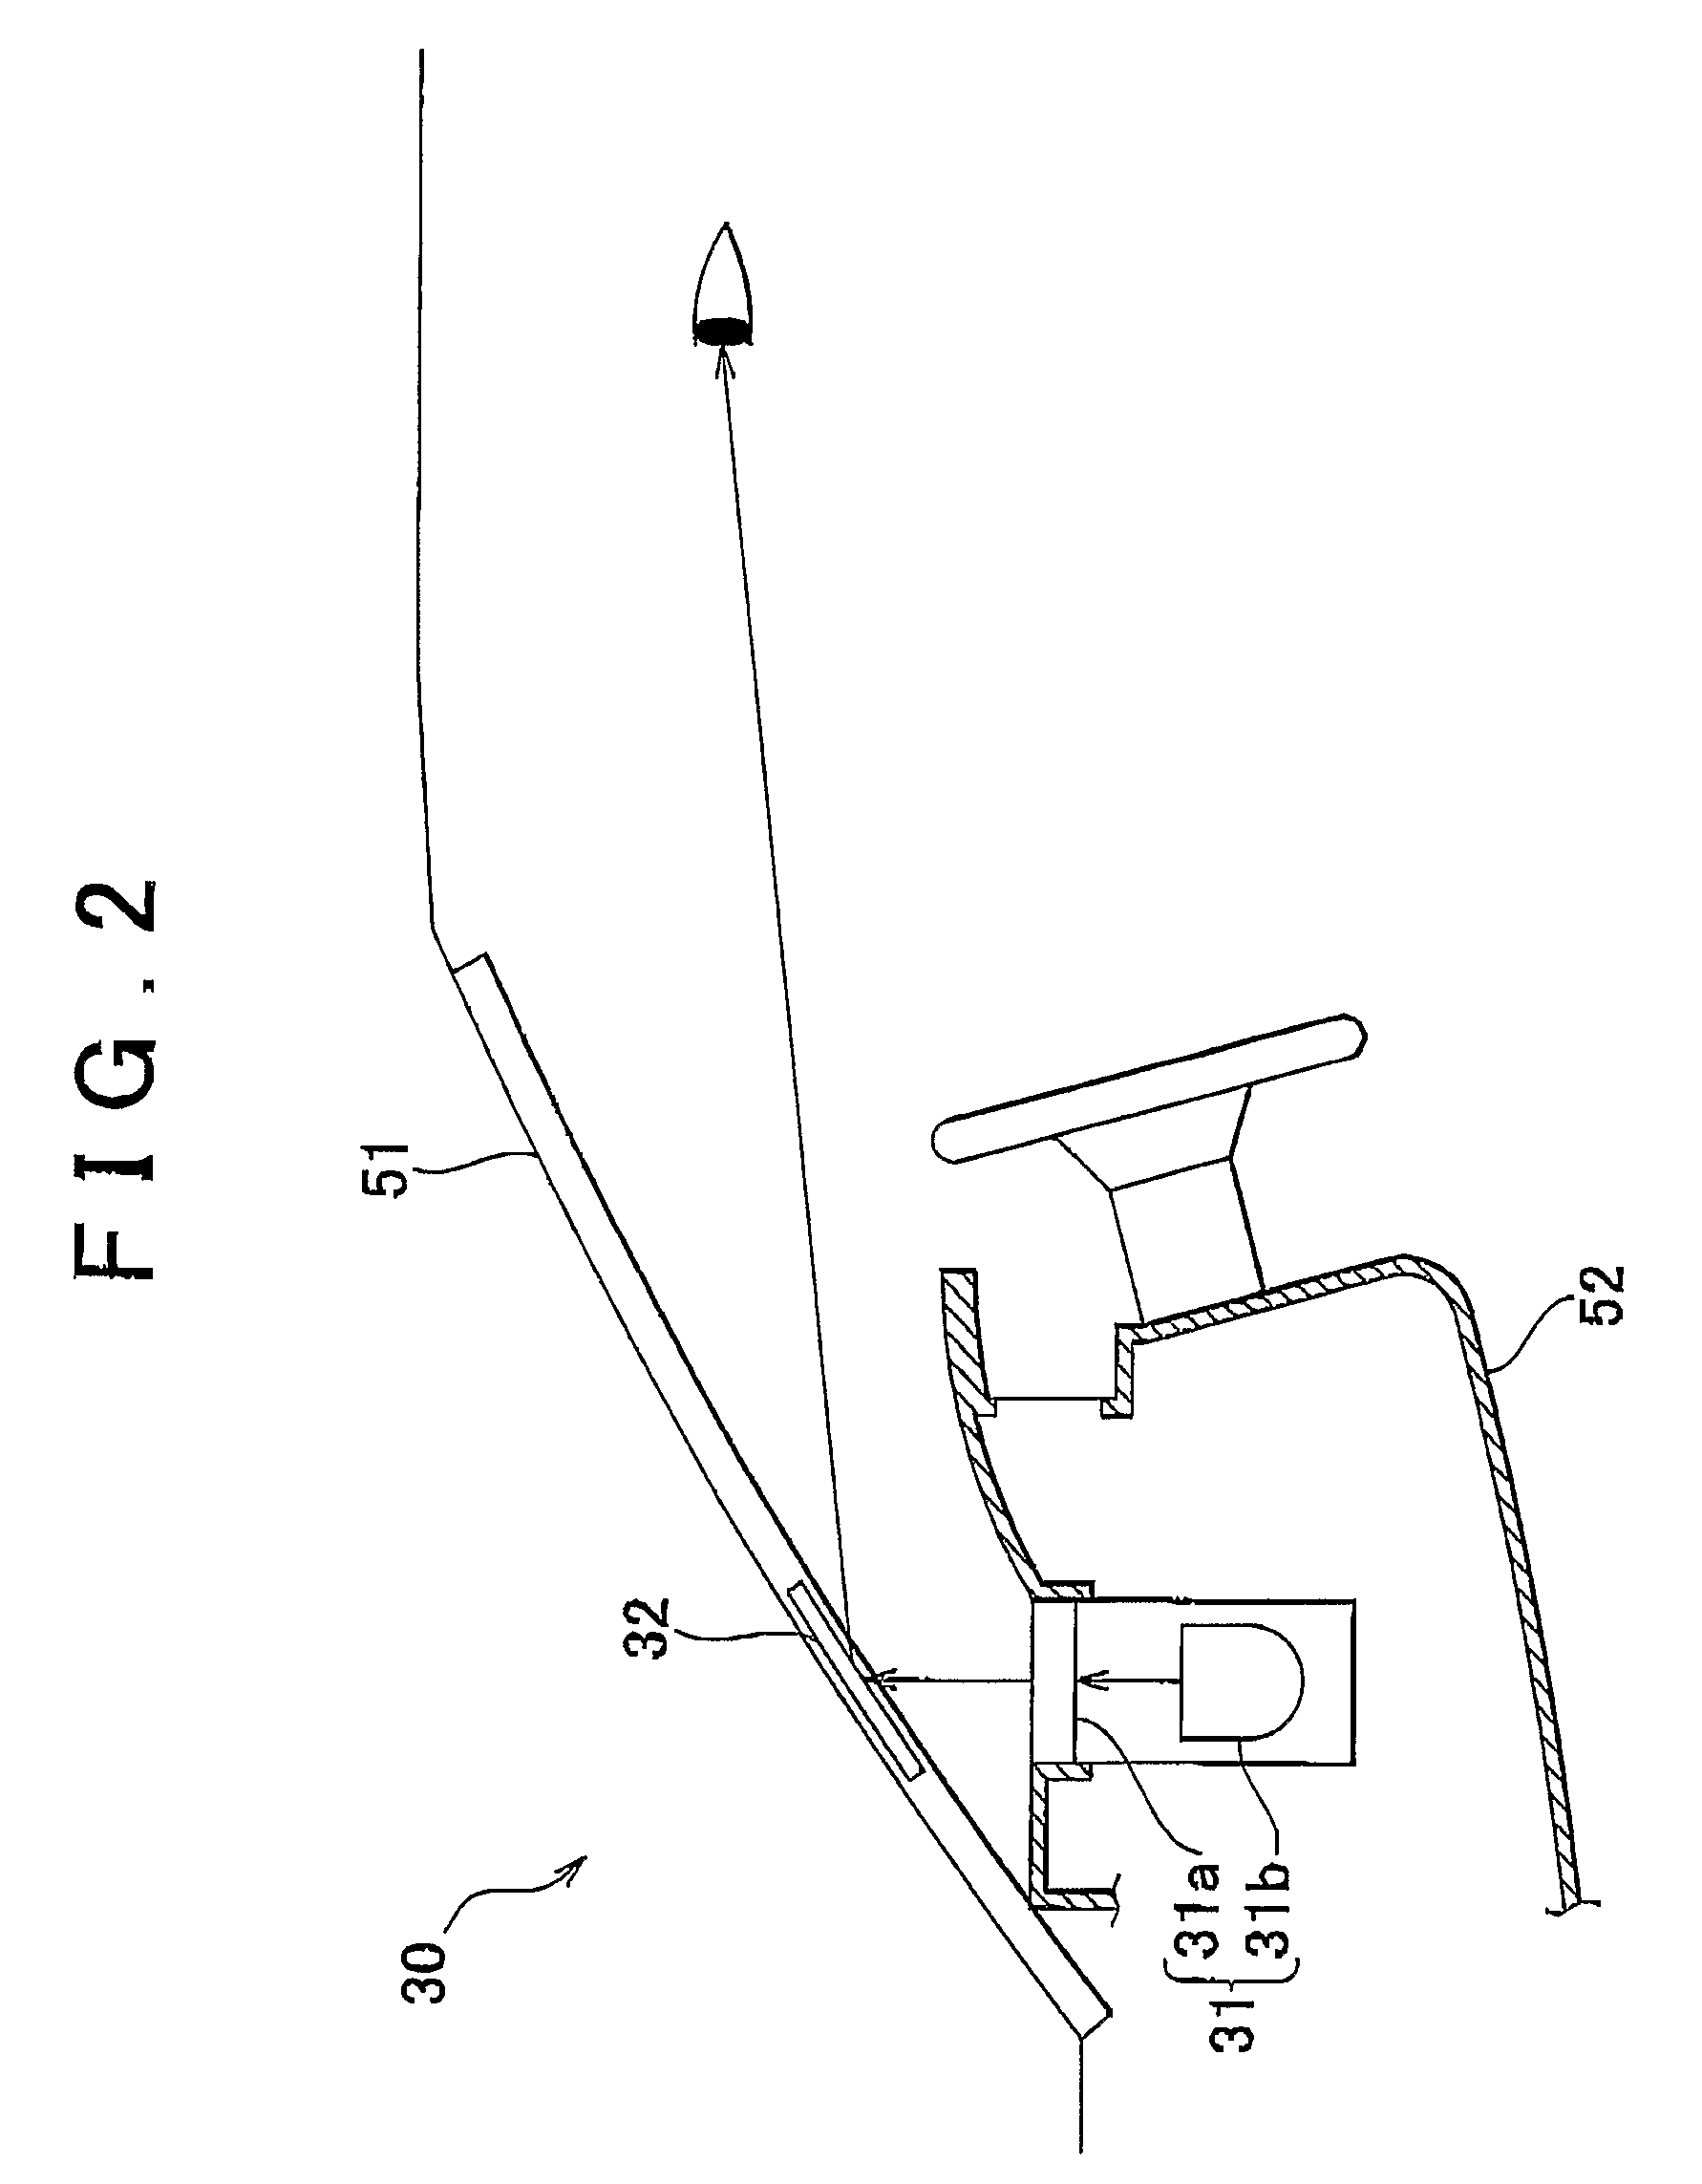 Vehicle surroundings information output system and method for outputting vehicle surroundings information